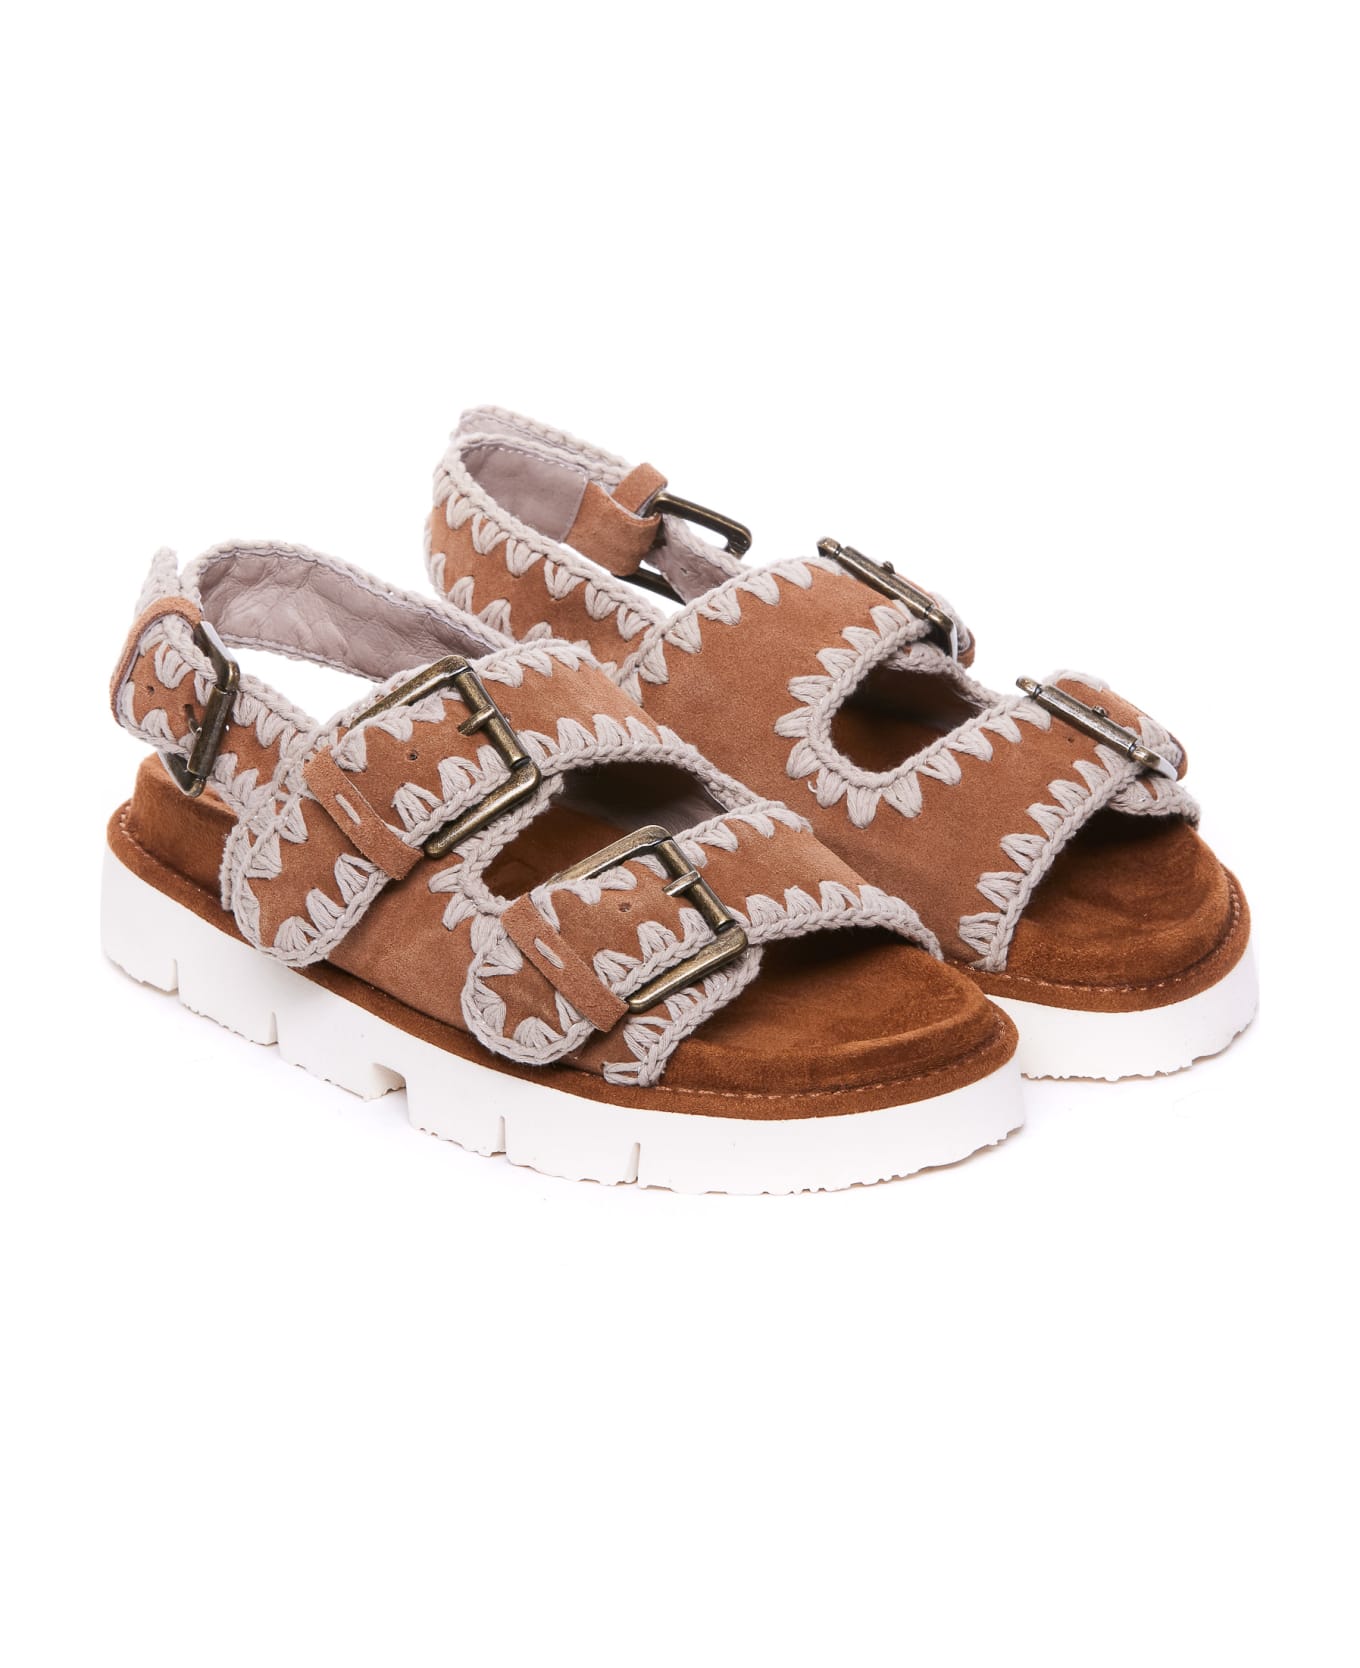 Mou New Bio Sandals - Brown